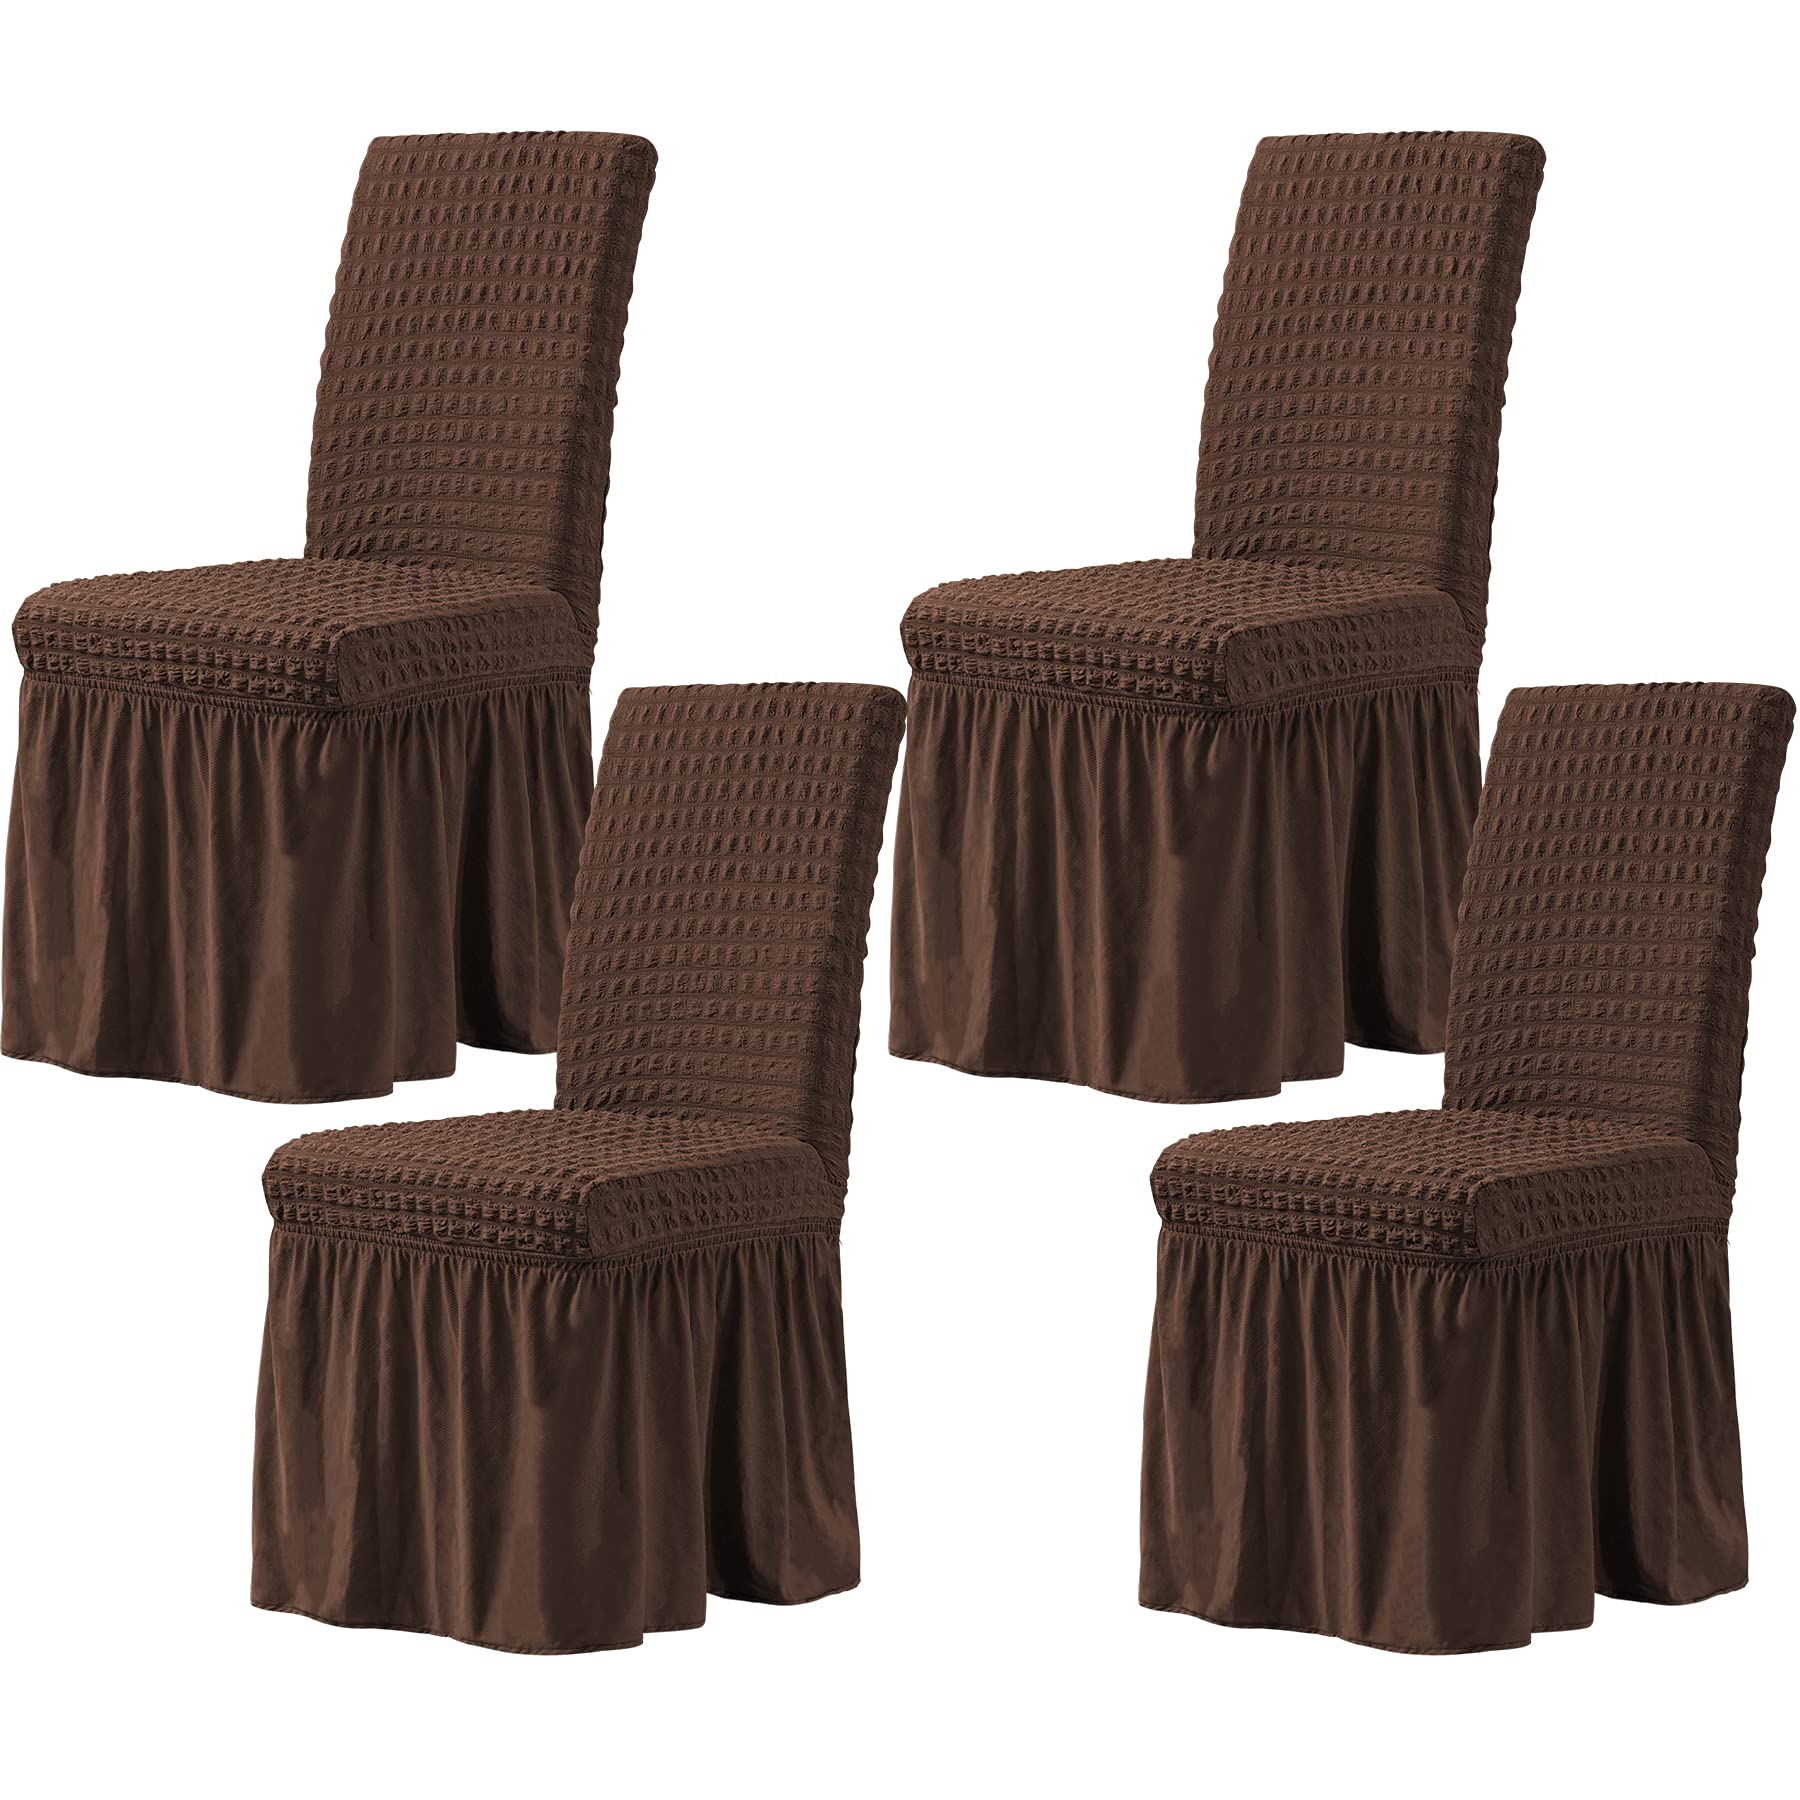 CHUN YI Dining Chair Covers Set of 4, Universal Stretch Dining Room Chair Covers with Skirt, Removable Parsons Chair Slipcover f